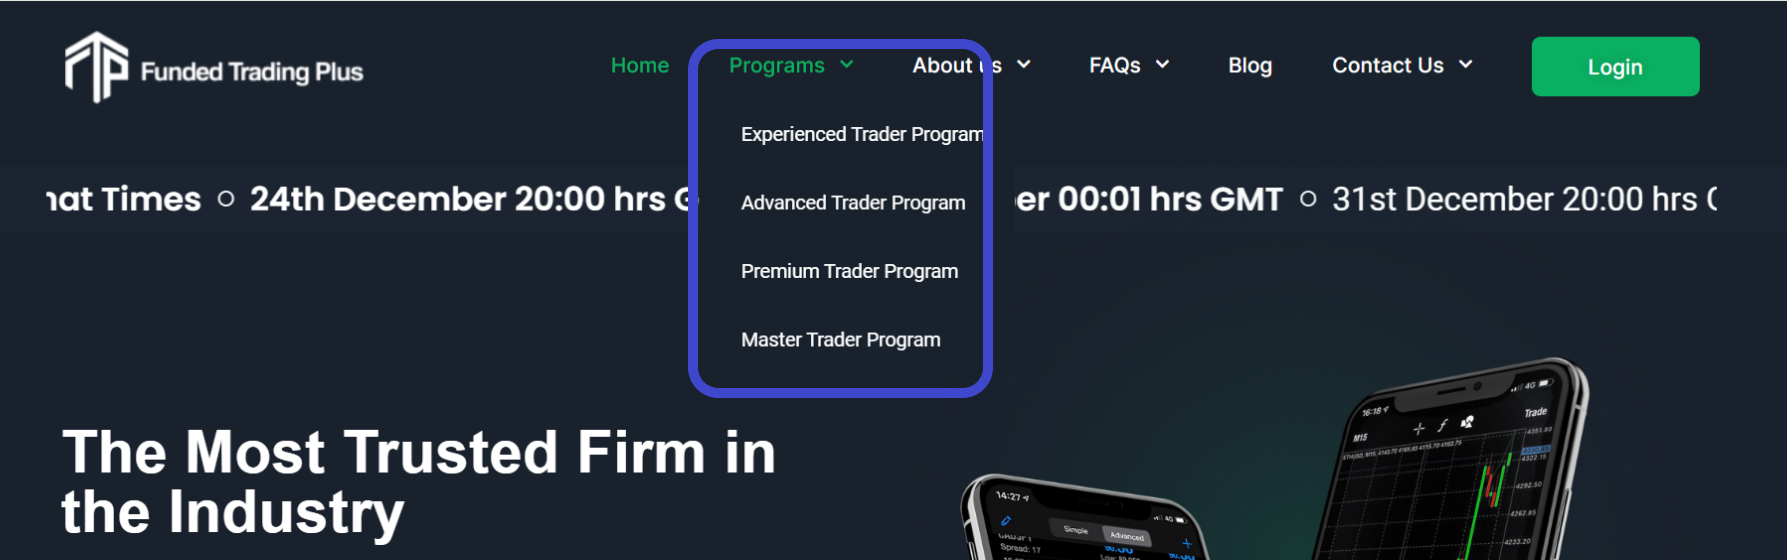 Funded Trading Plus- Log In steps